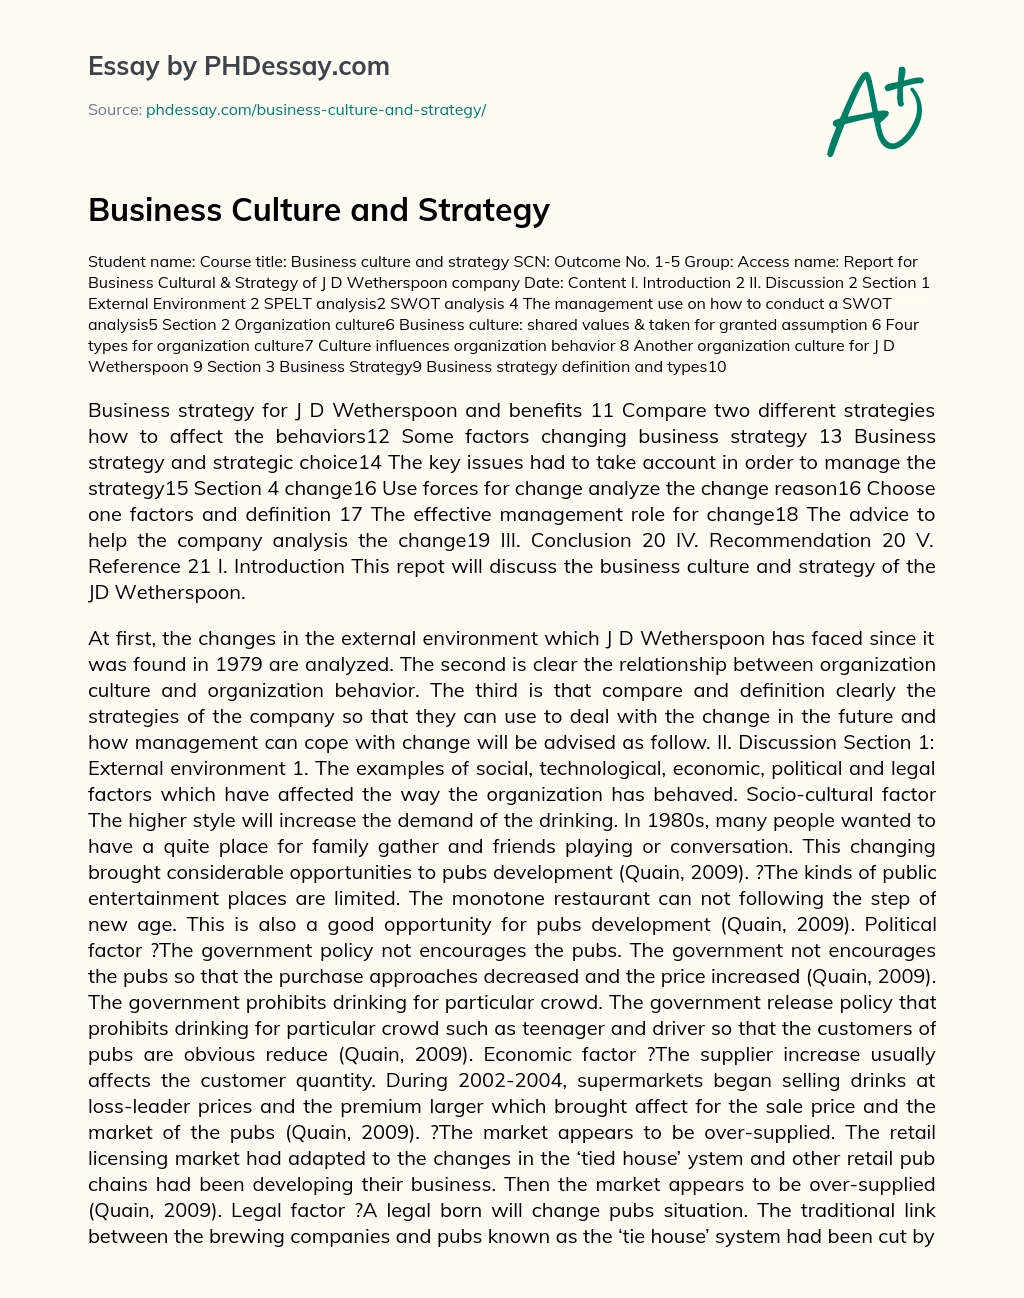 Business Culture and Strategy essay